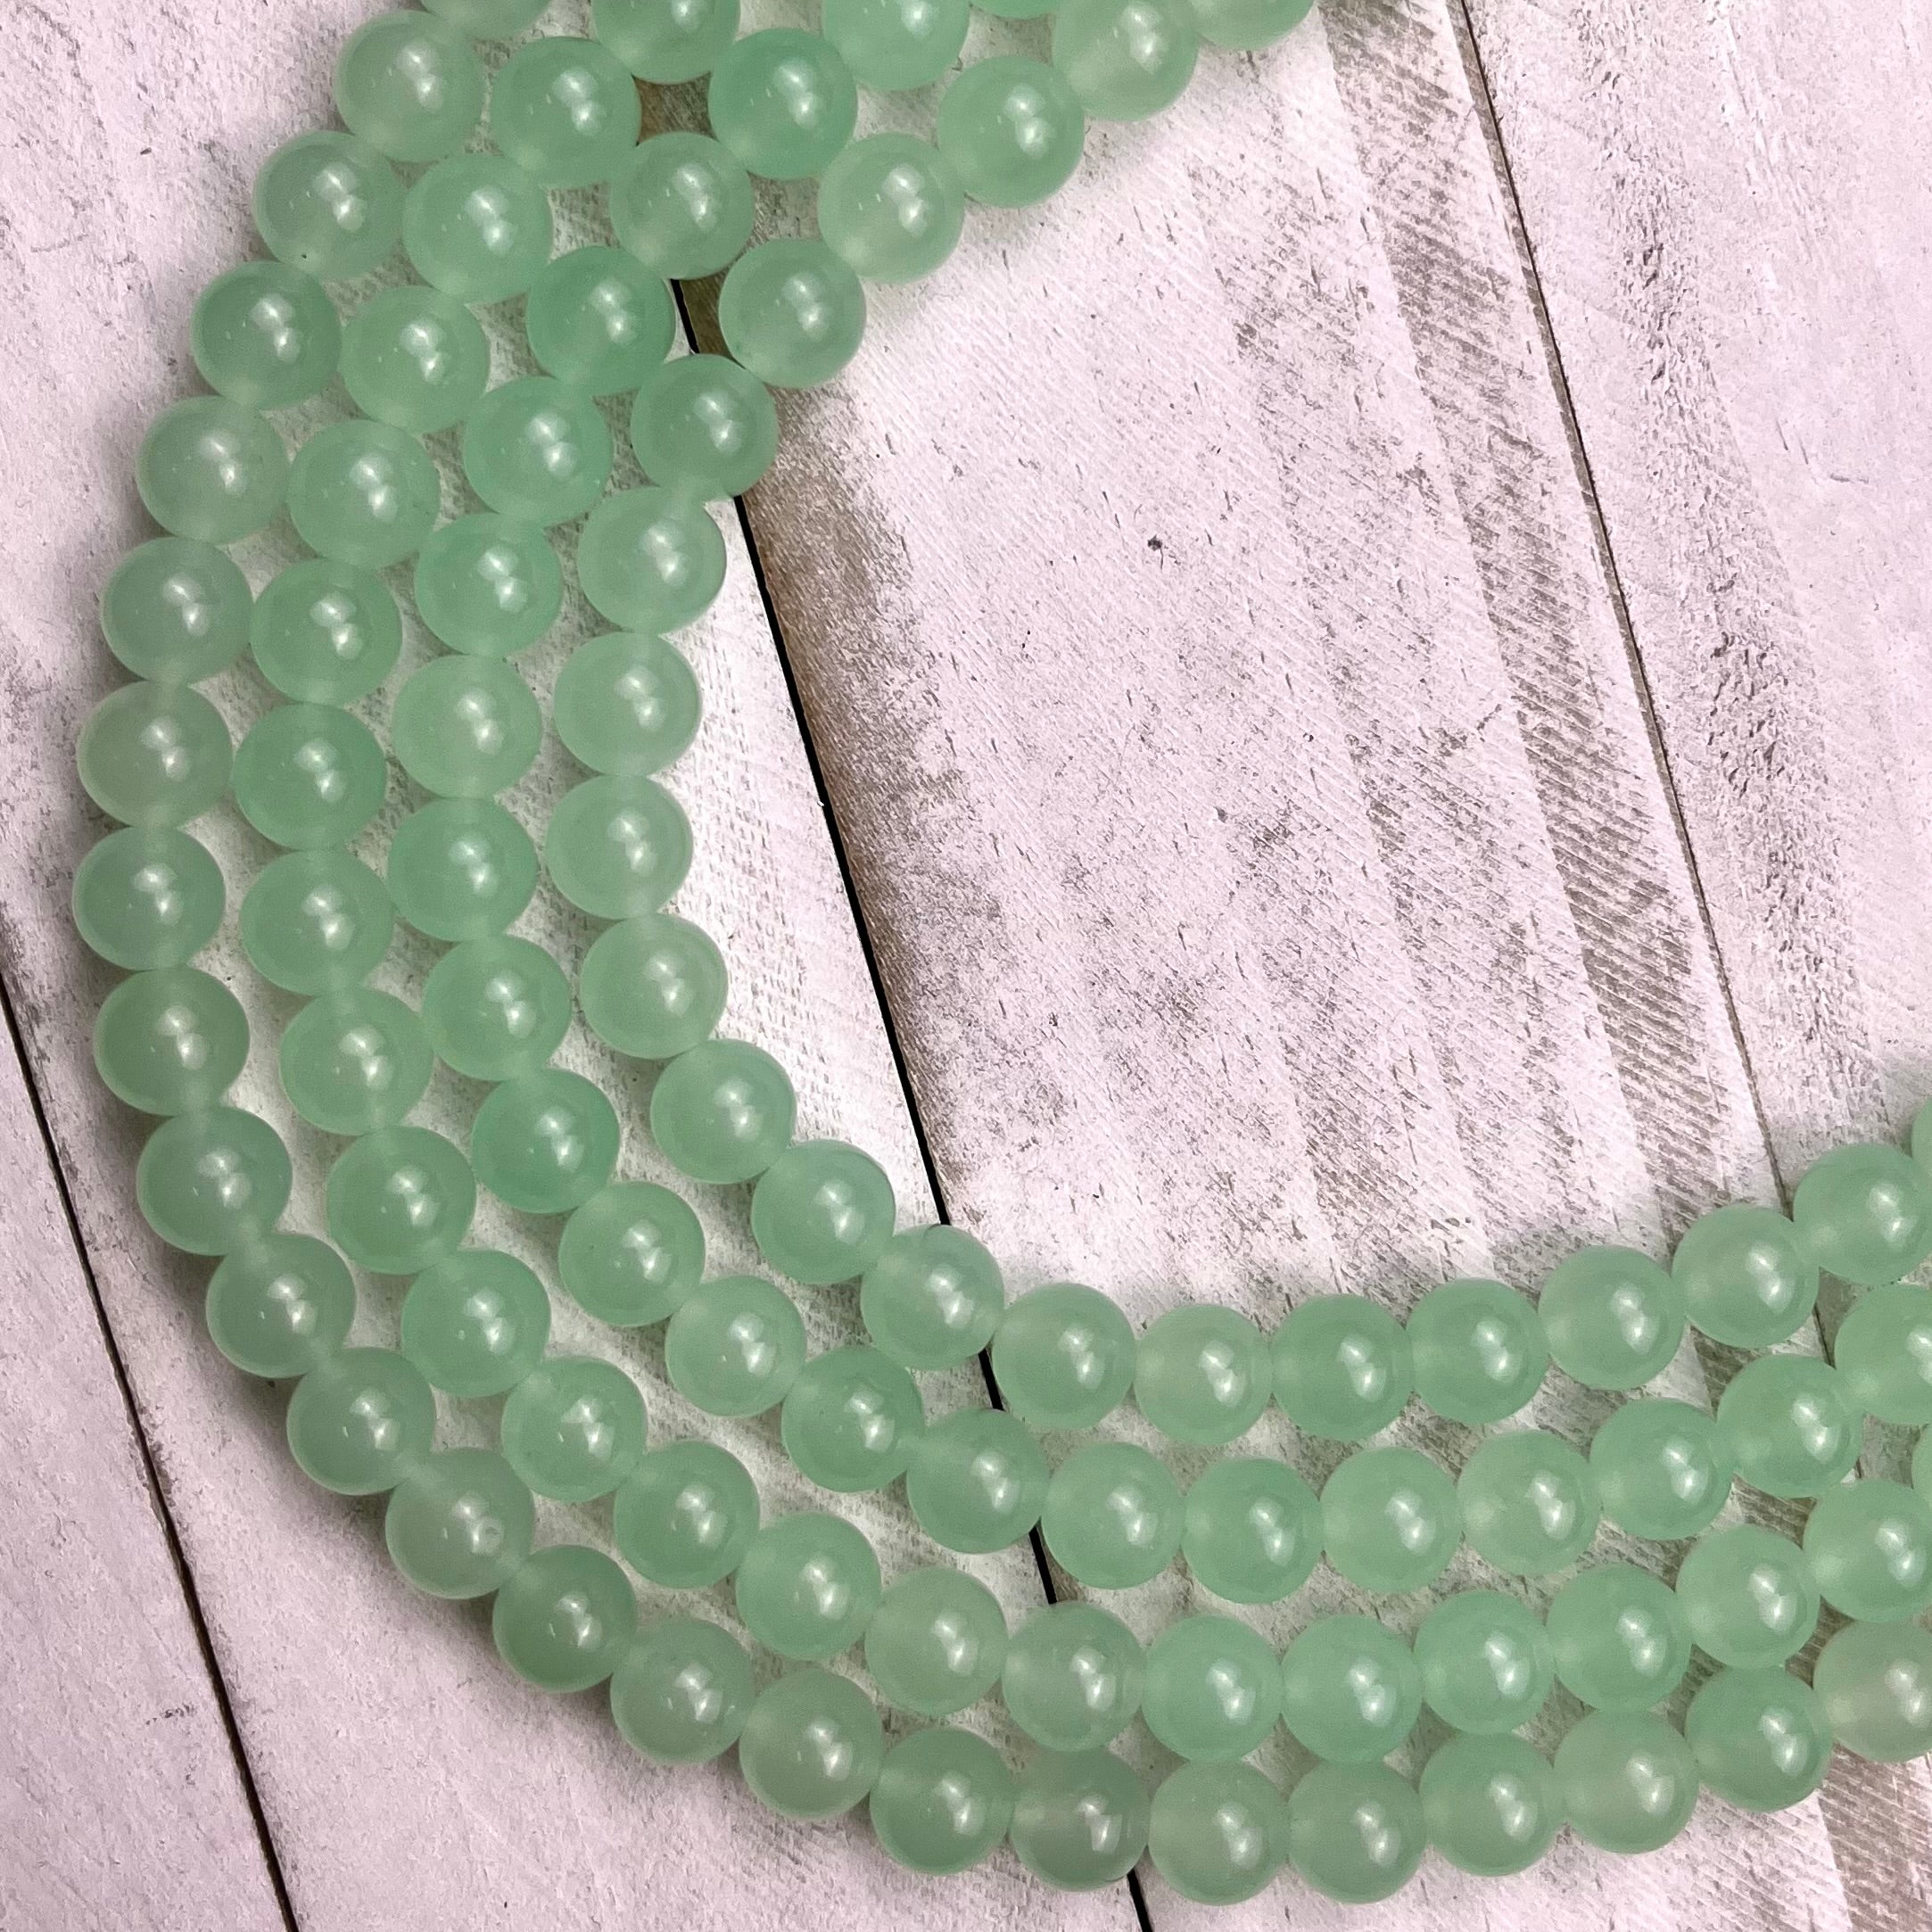 8mm Dyed Light Green Chalcedony Bead Strand